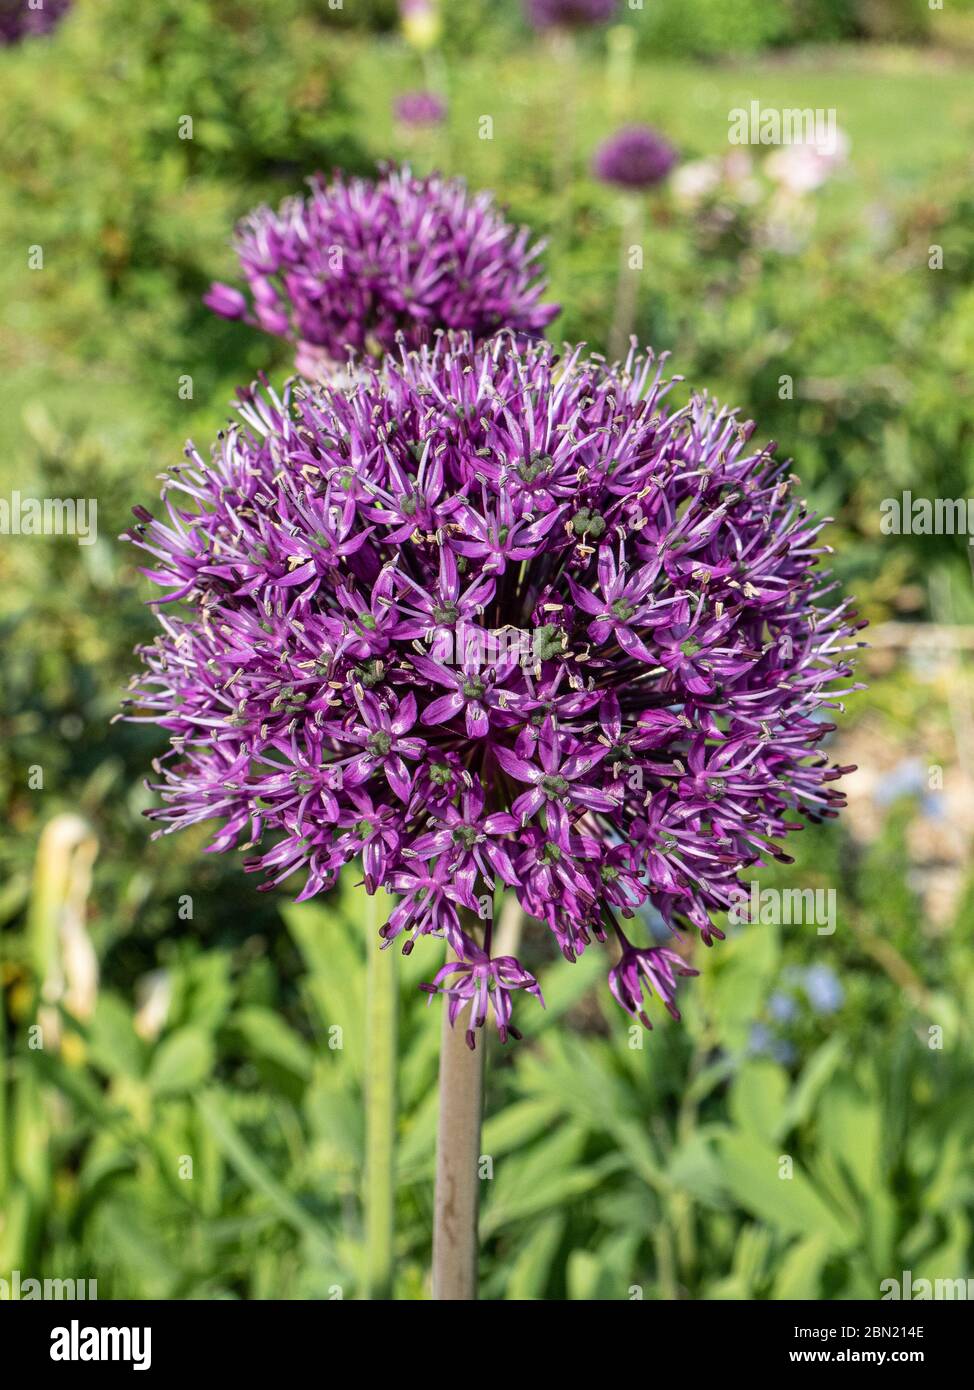 A group of flowers of the early flowering Allium Purple Sensation Stock Photo